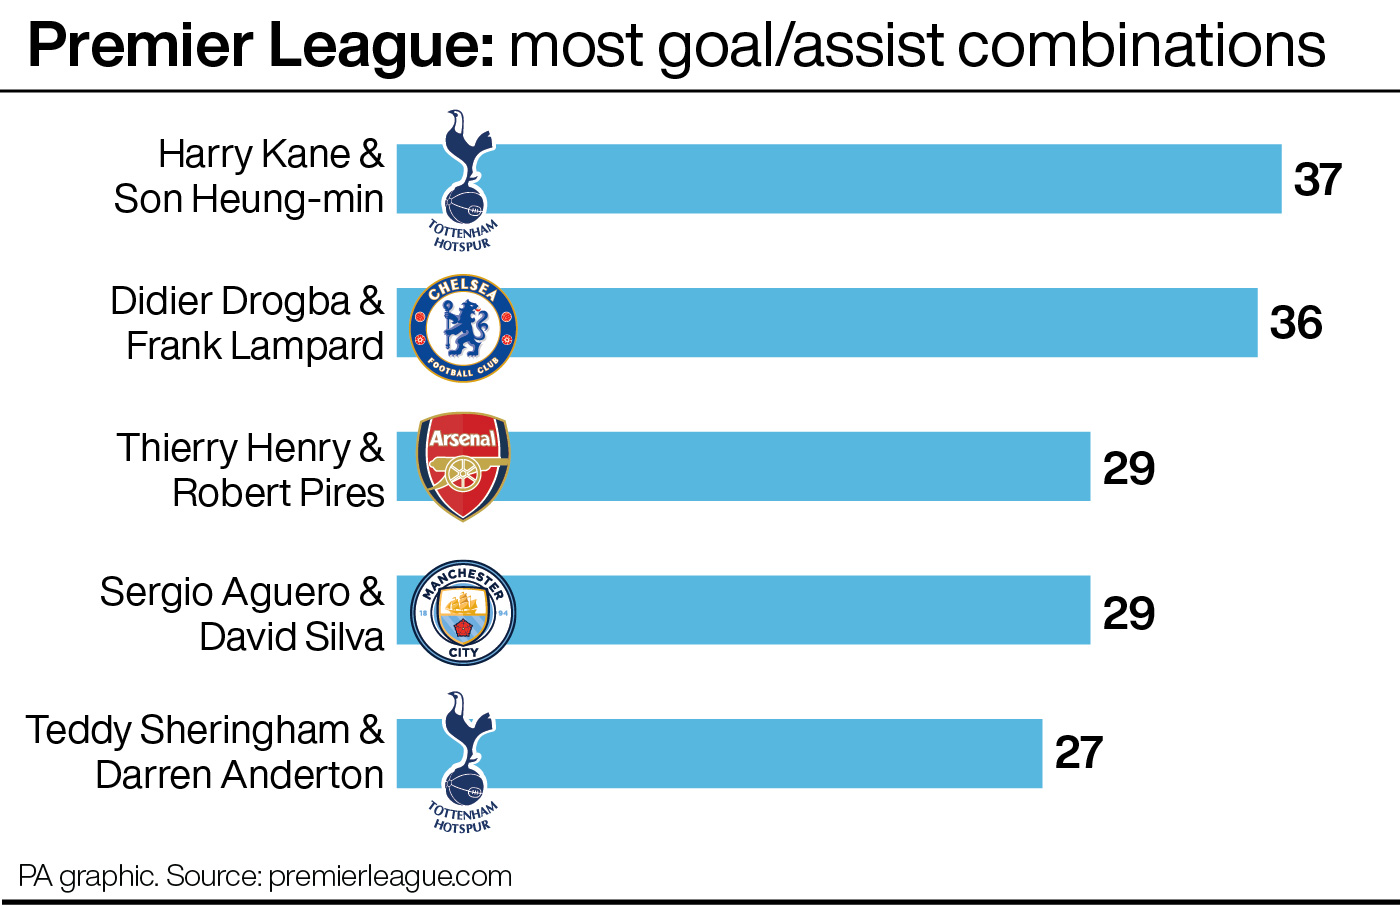 Harry Kane and Son Heungmin set Premier League record for goal